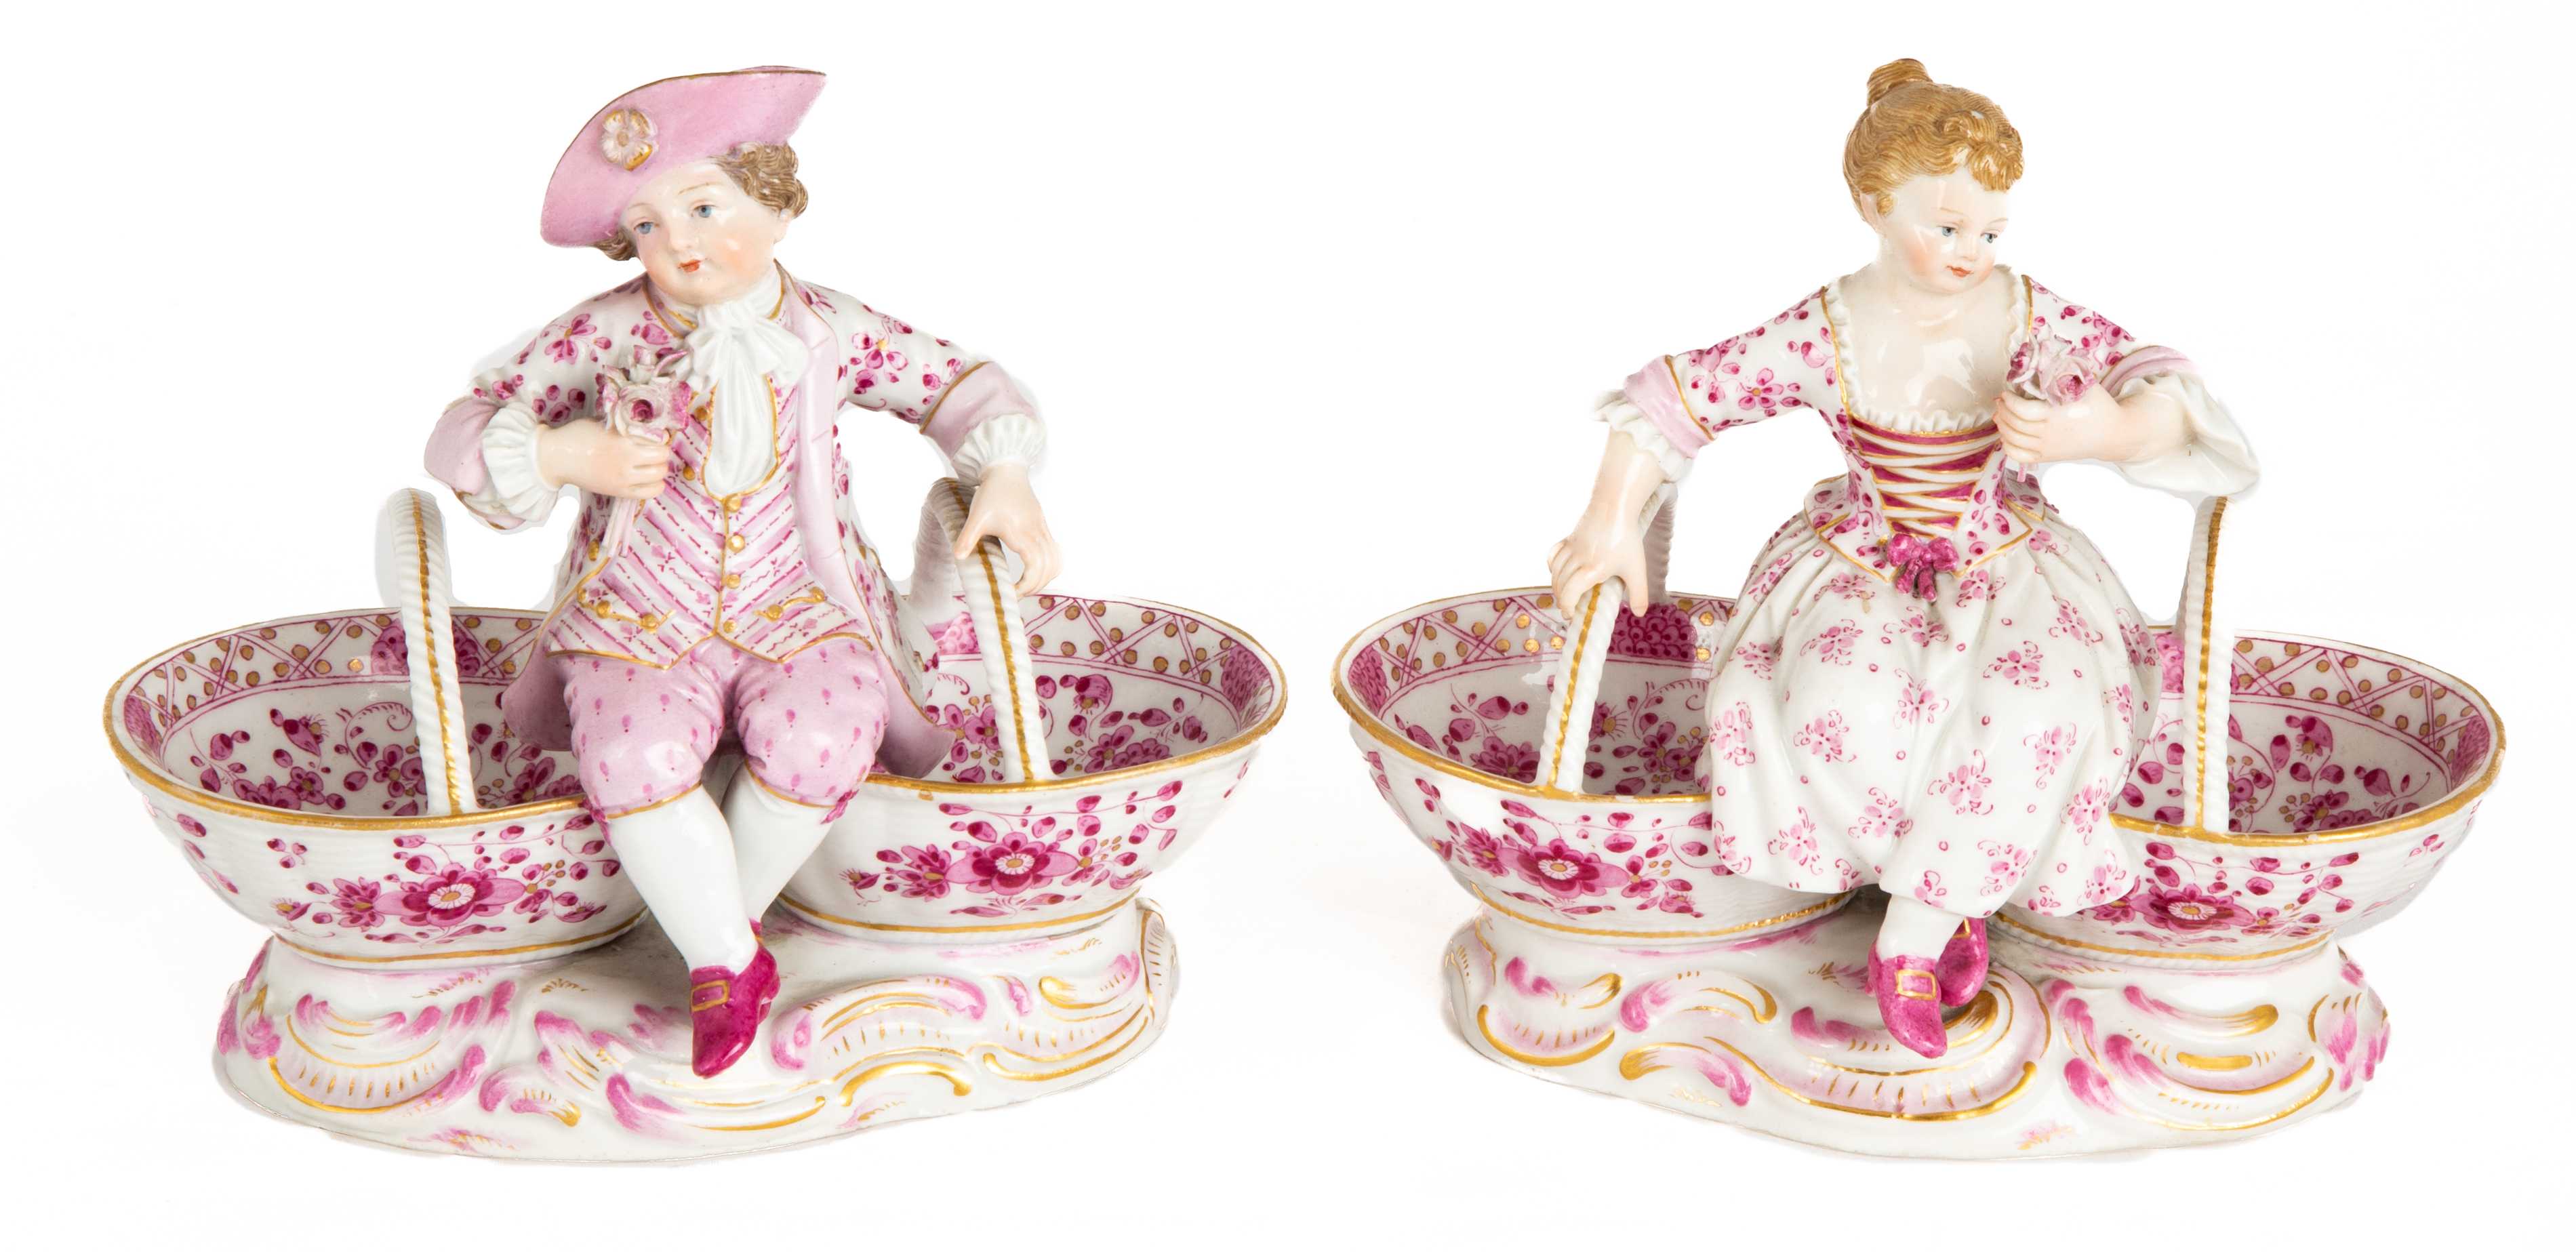  3 MEISSEN SWEET MEAT DISHES 19th 28d609